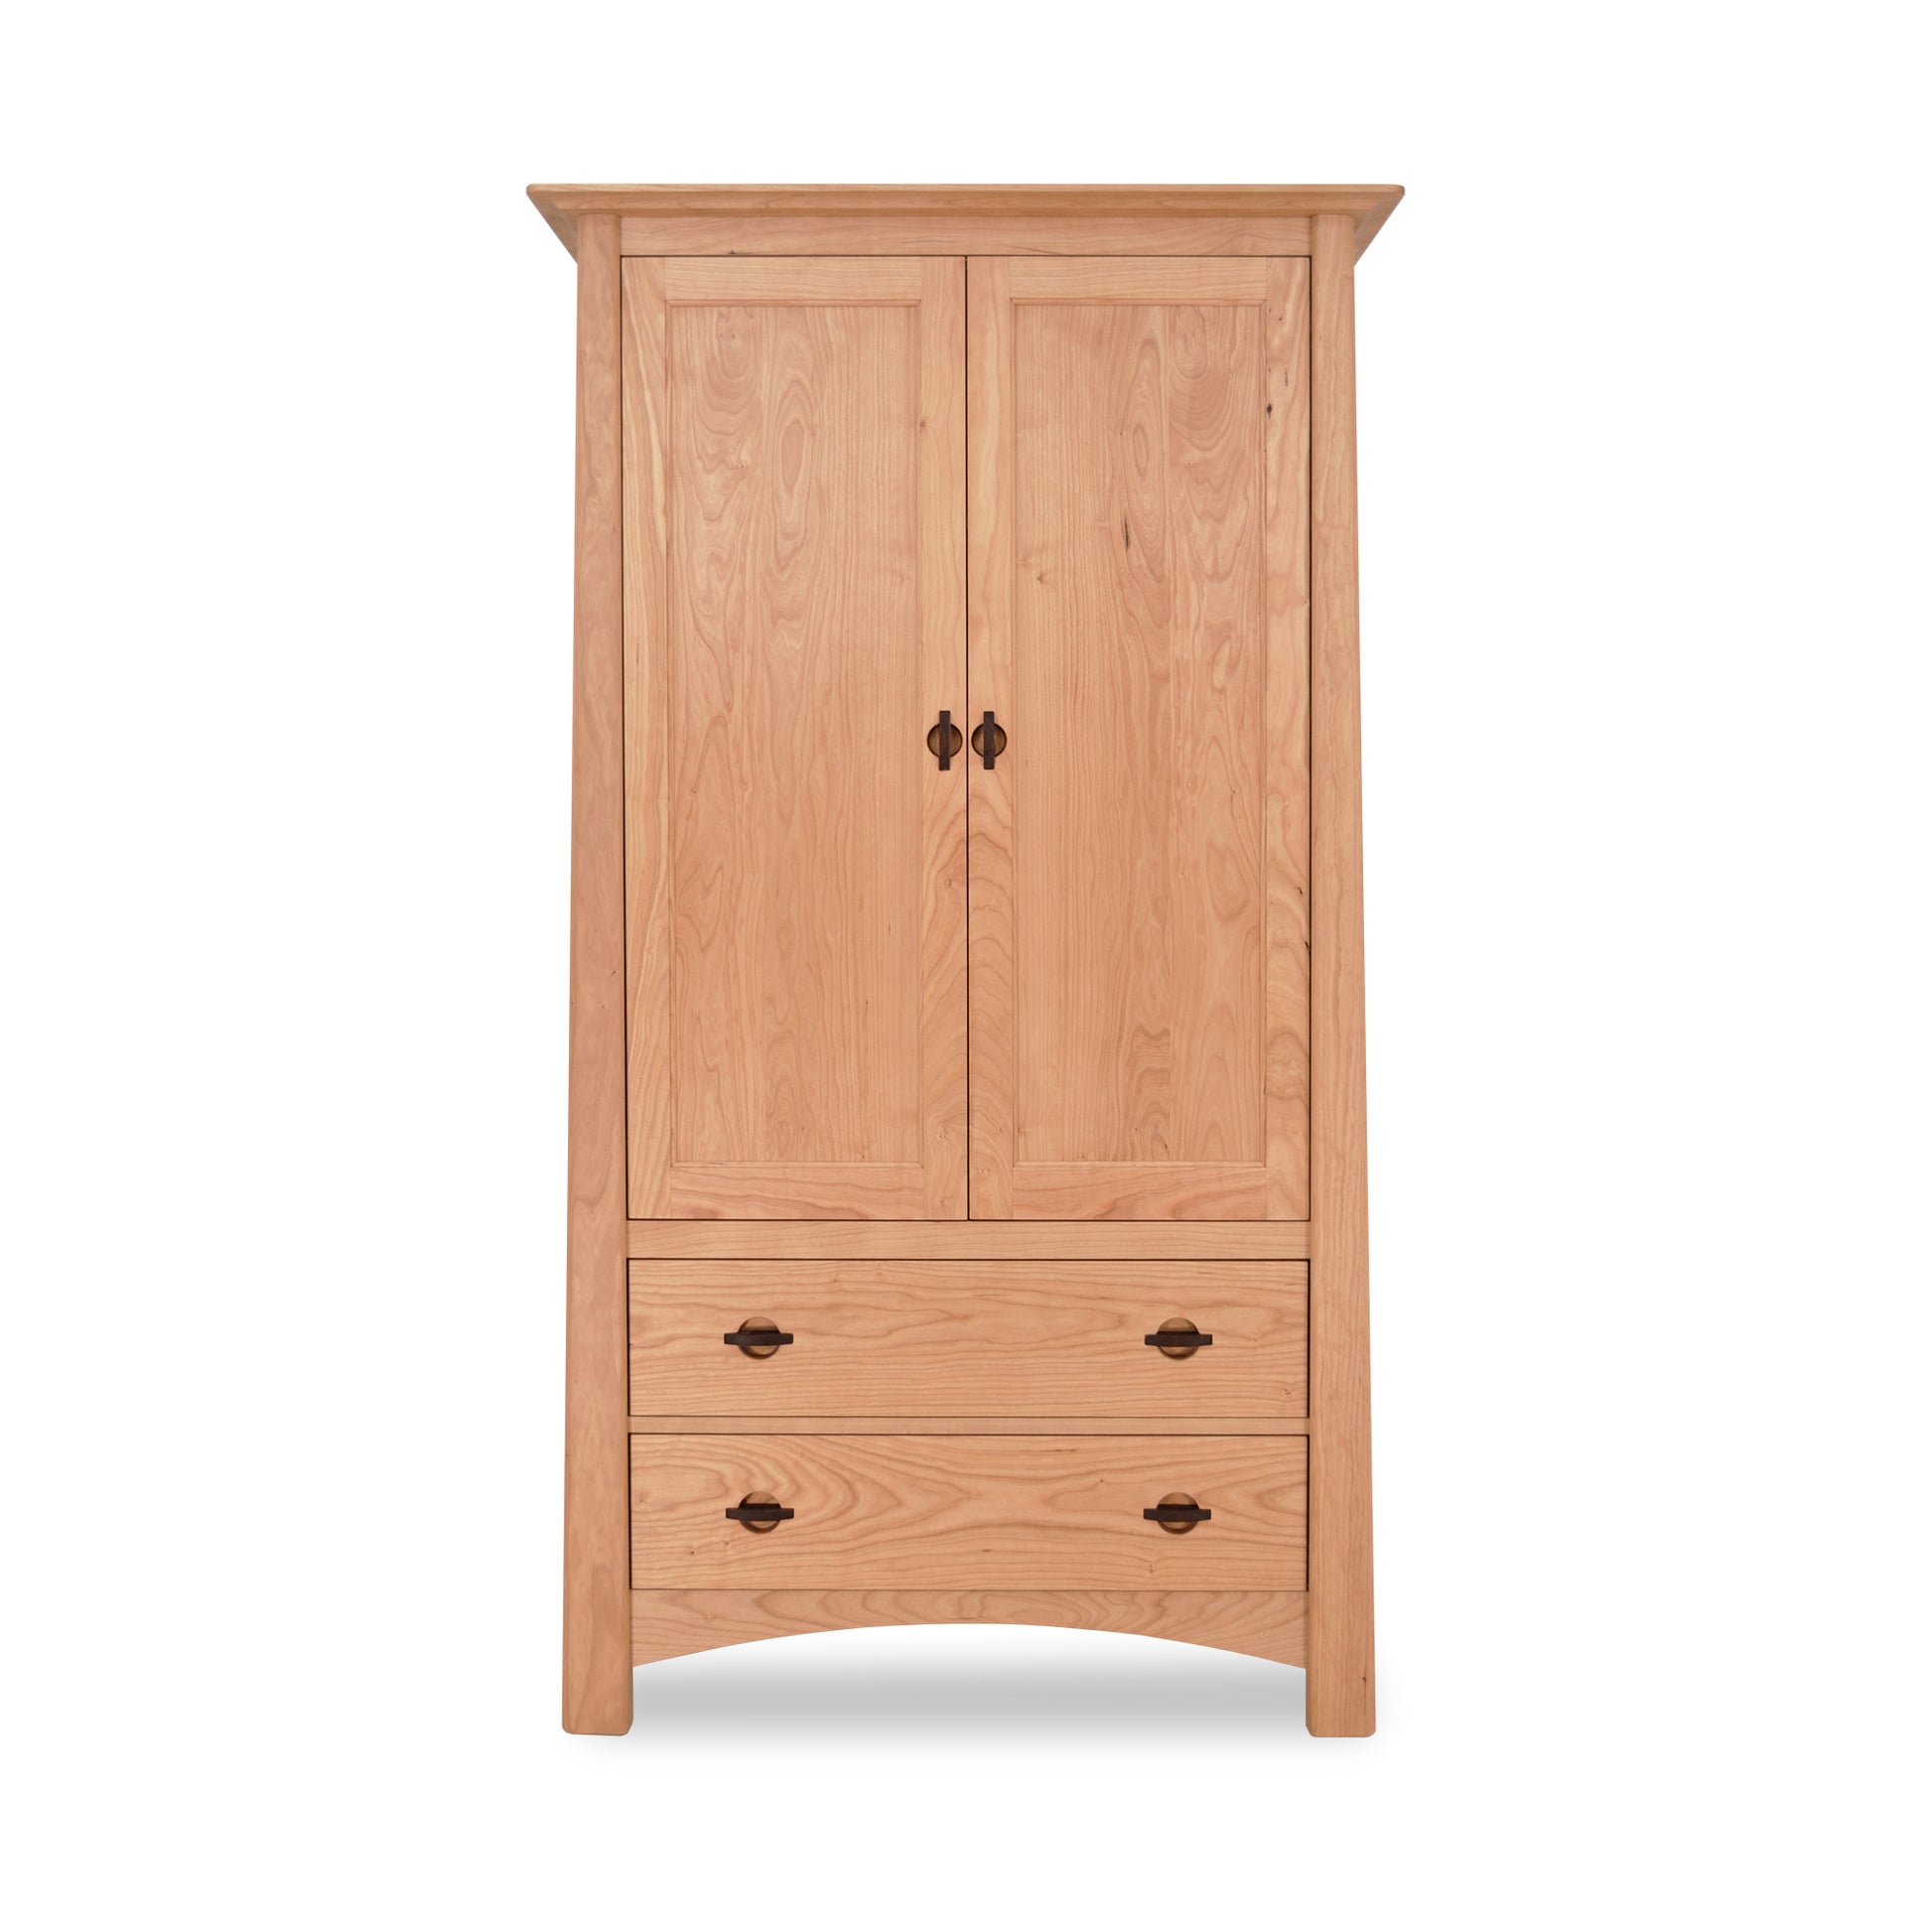 A Maple Corner Woodworks Cherry Moon Armoire with two doors and three drawers, isolated on a white background, featuring Vermont craftsmanship and solid hardwood construction.